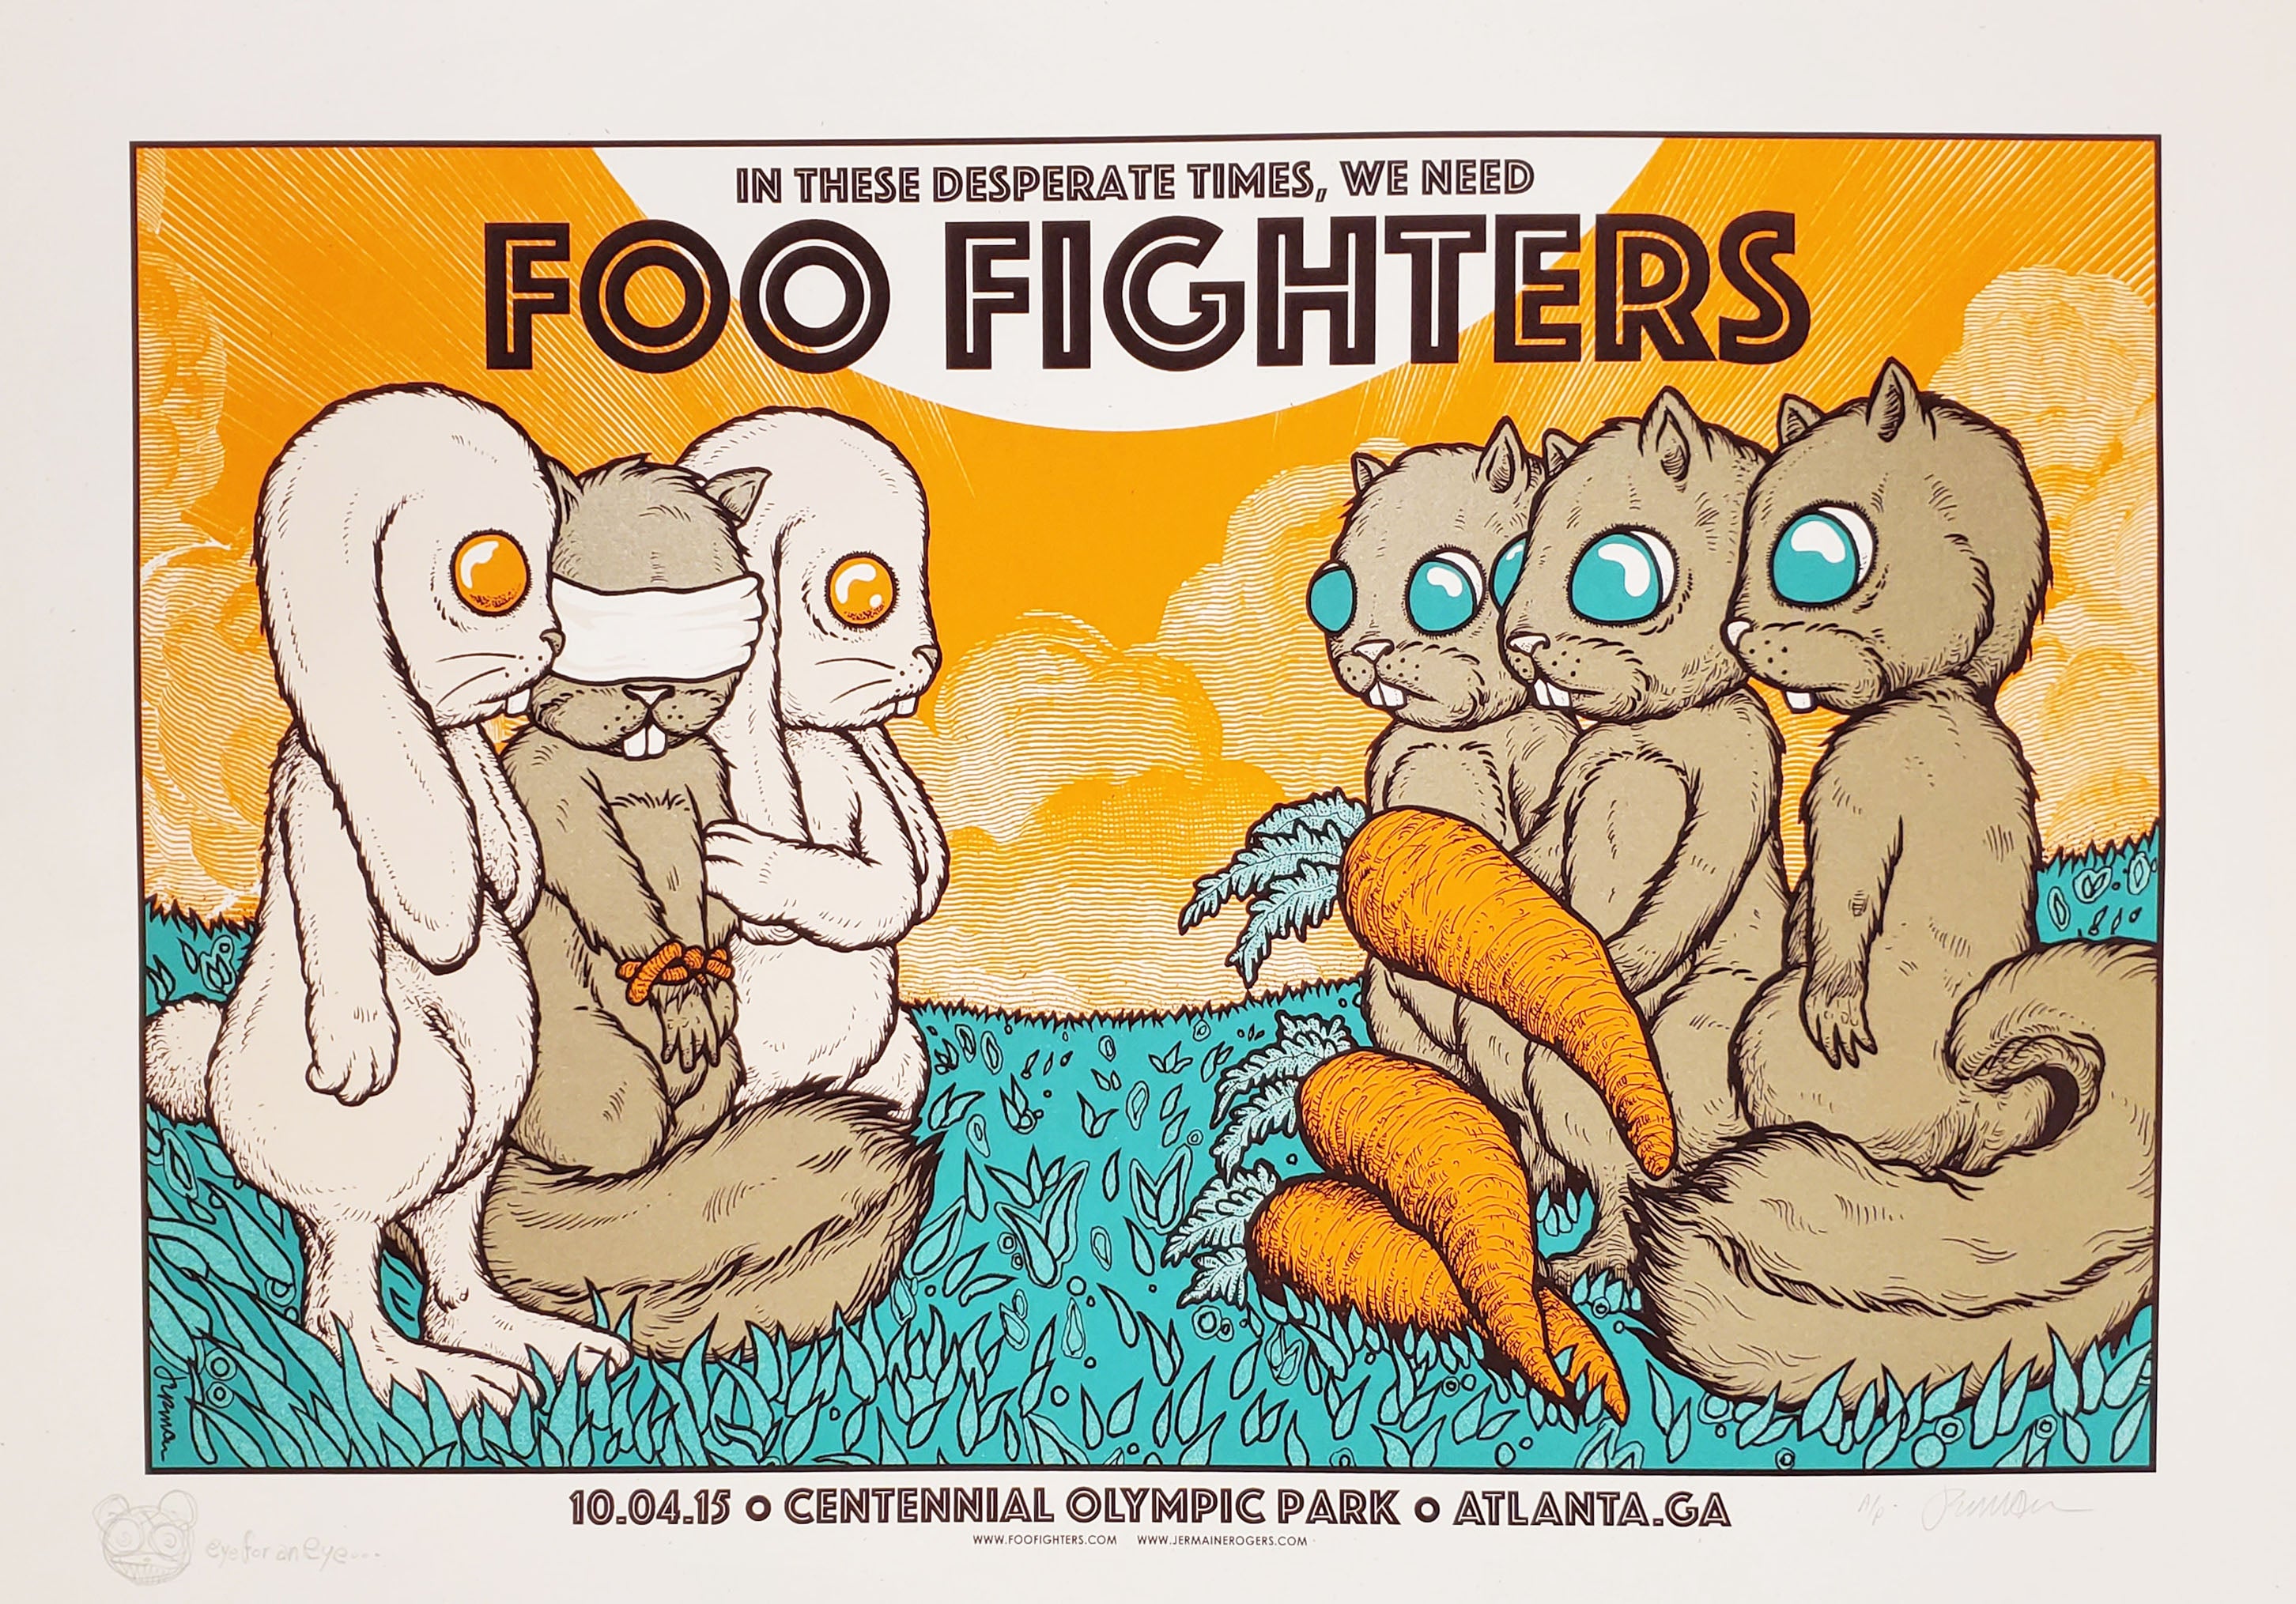 Foo Fighters - ATL 10.04.15 A/P - Speckled Cream (The Exchange) with Remarque